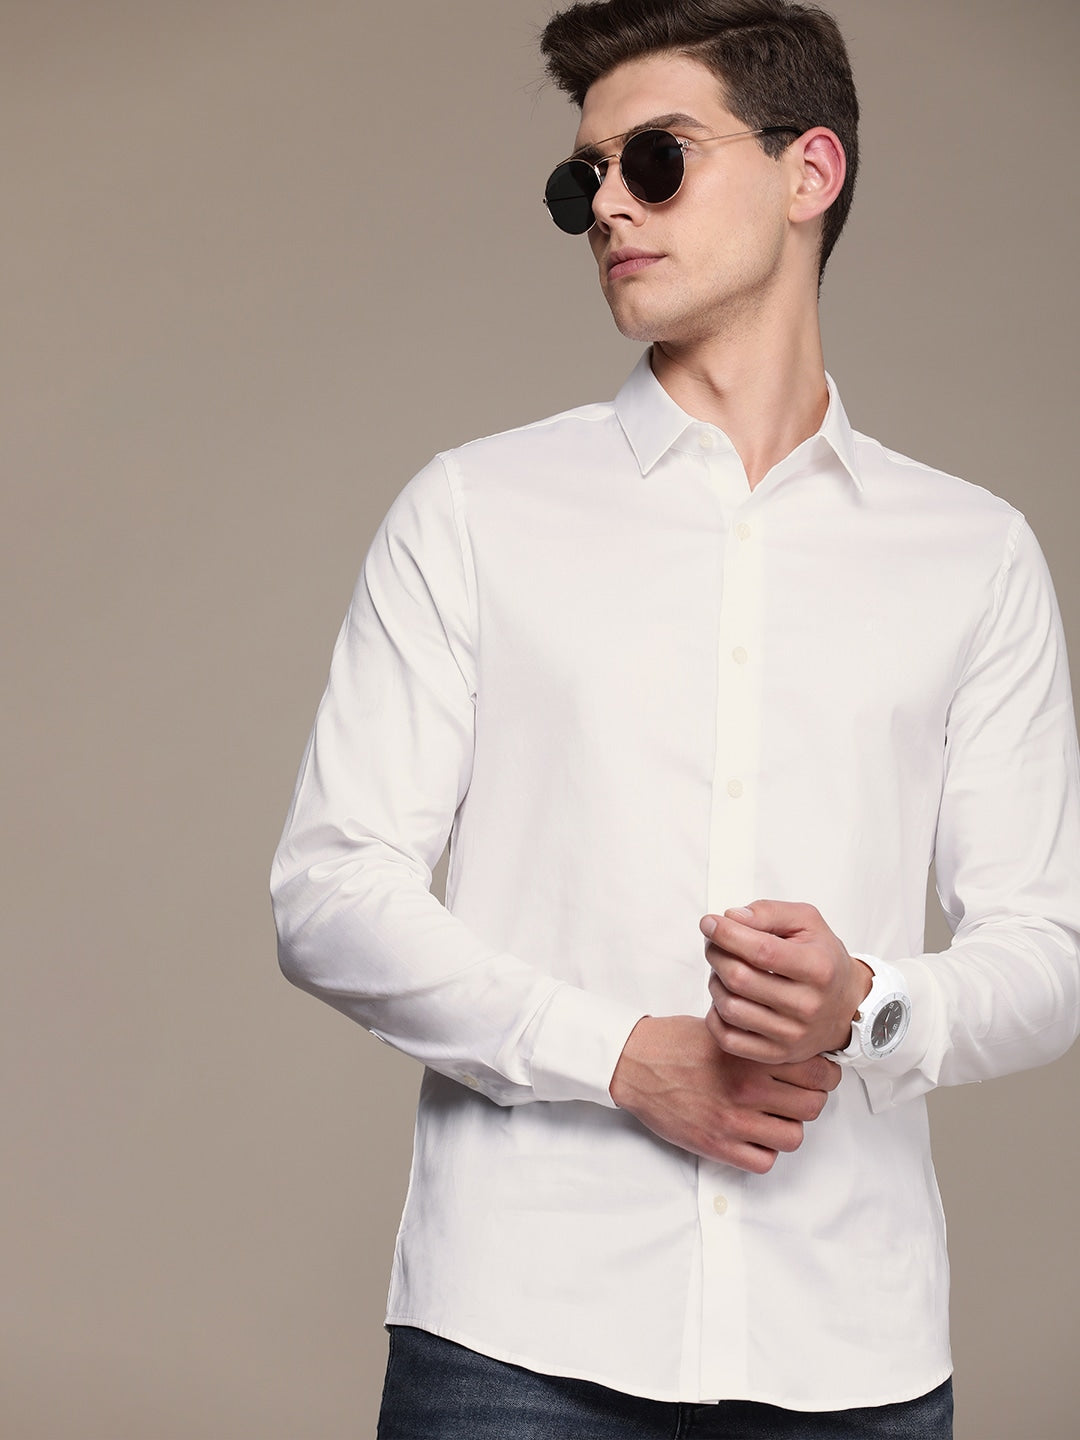 Casual Shirts For Men In Pakistan - BrandsEgo